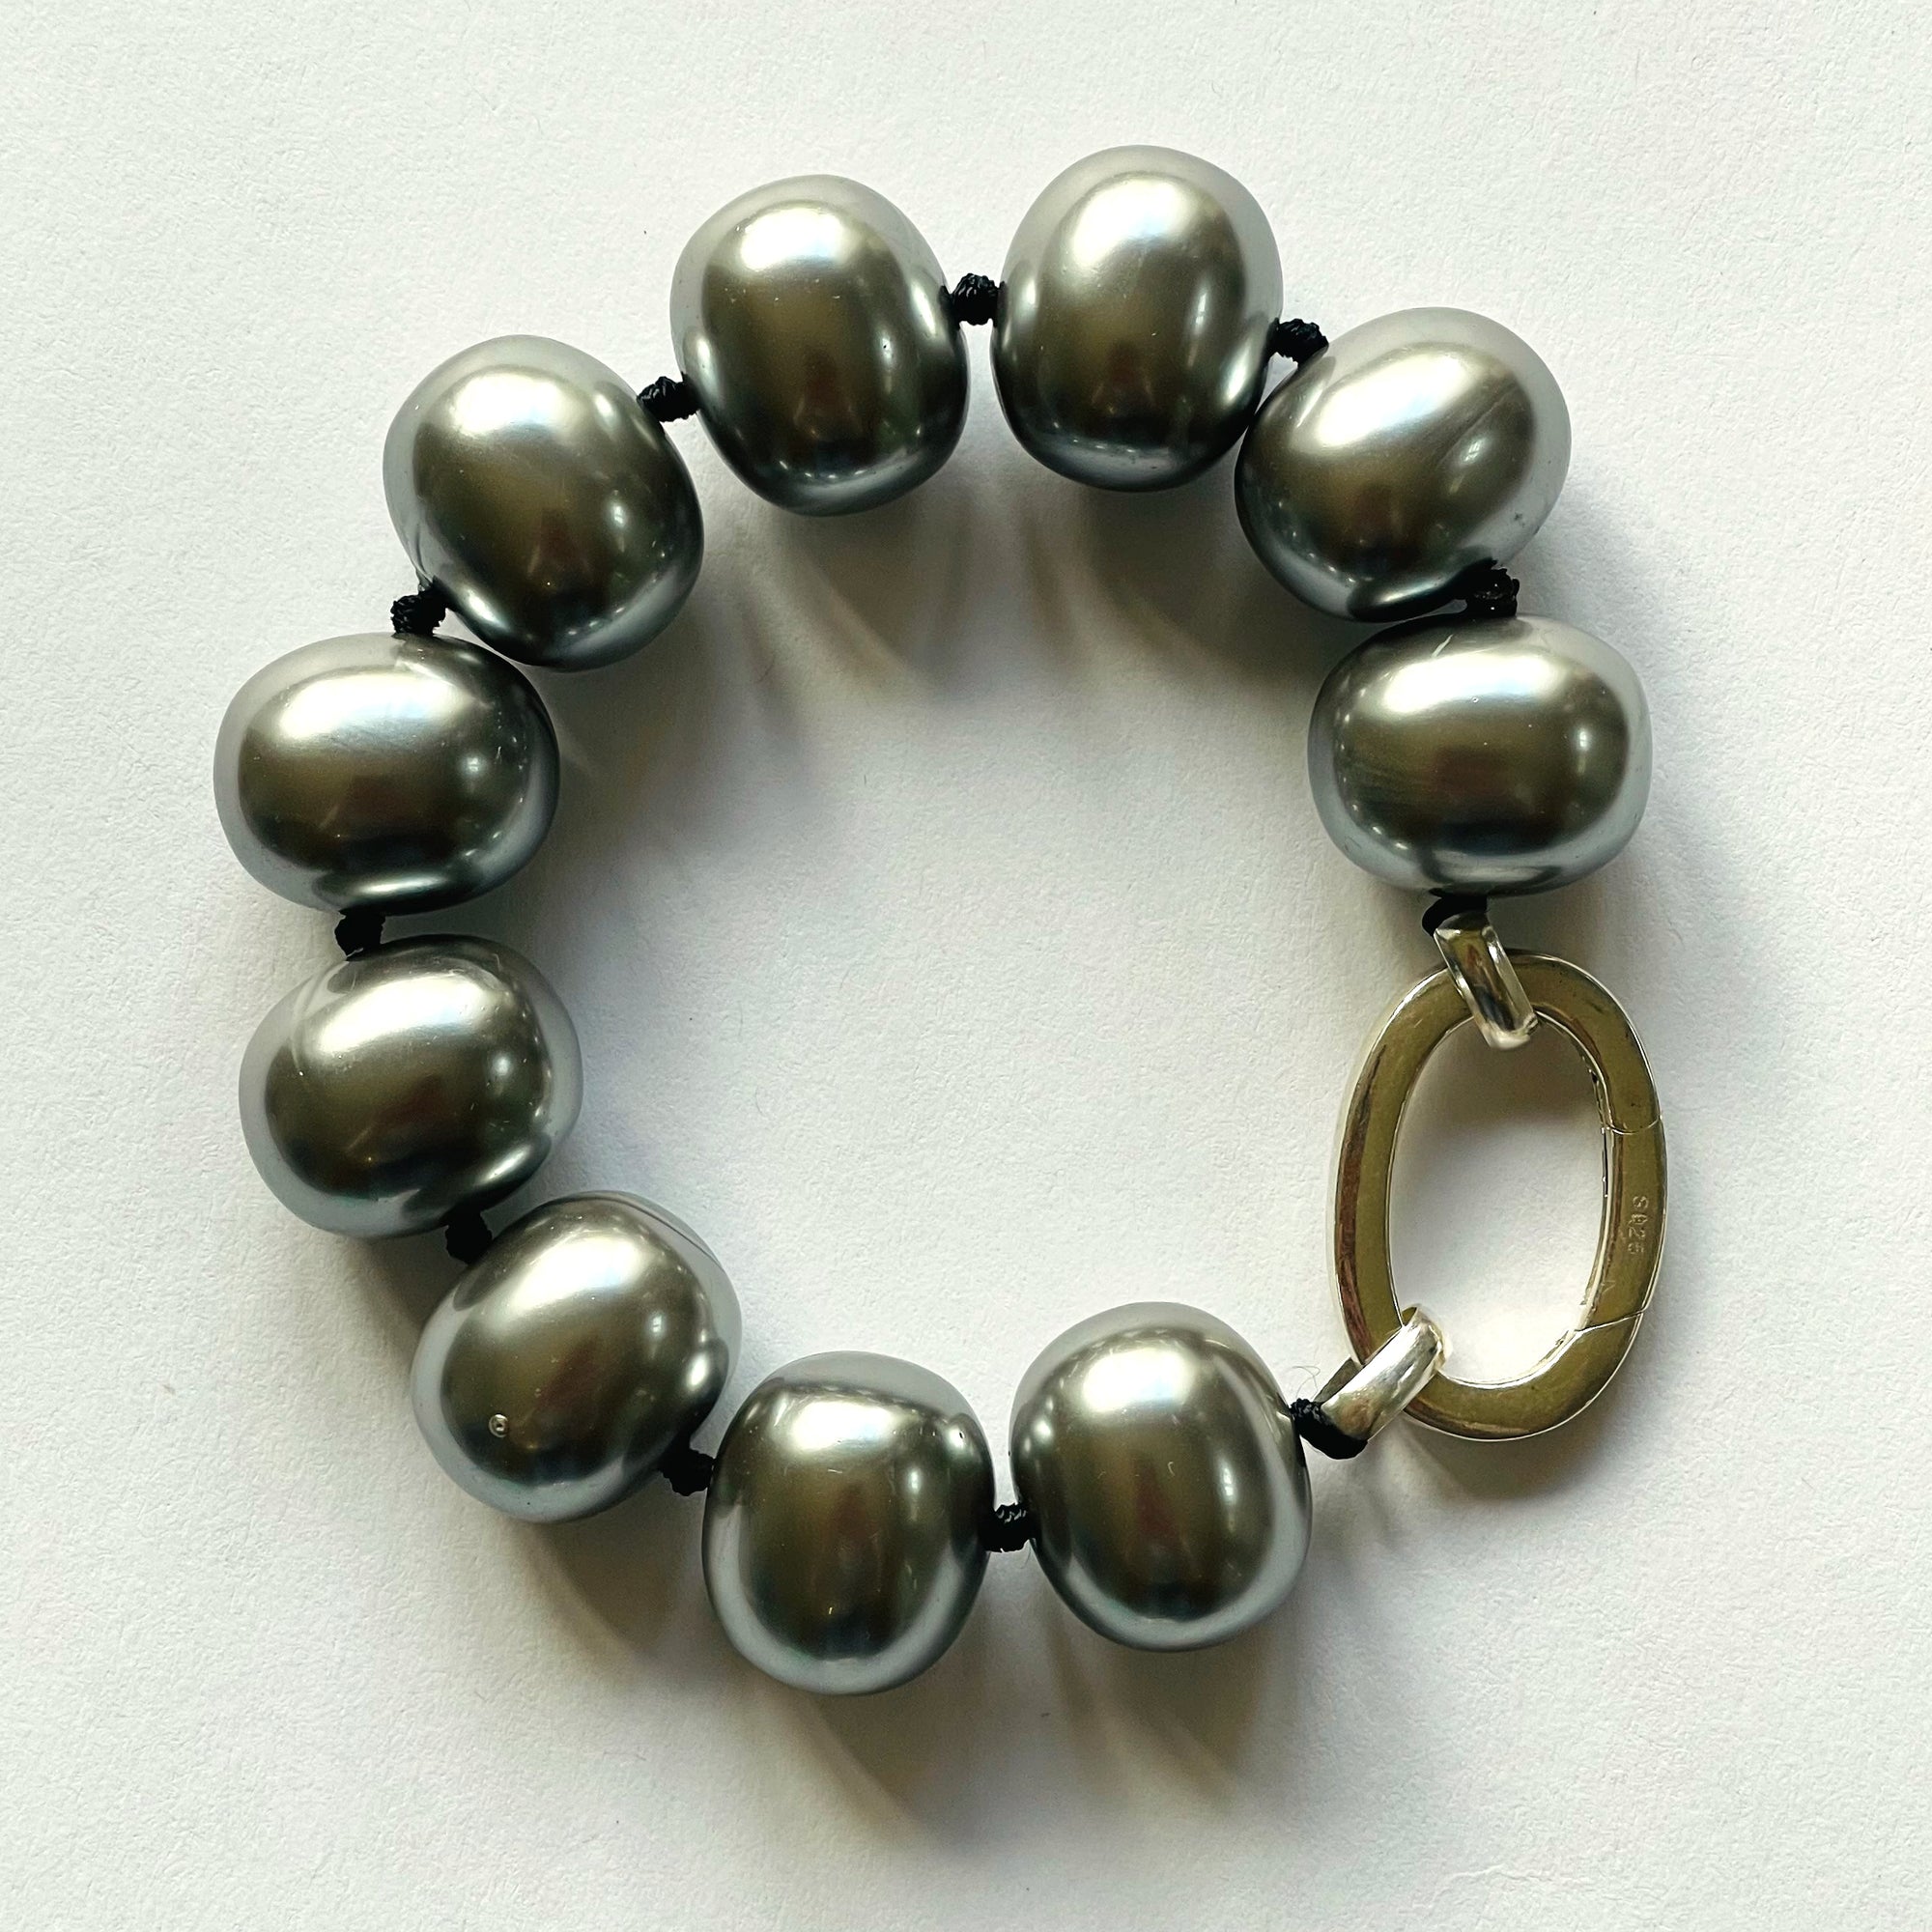 Beautiful handcrafted cuff-style statement bracelet of organic silver freshwater shell pearls, approx. 19 m x 11 mm. Hand-knotted with black thread, bracelet measures 21 cm (8.25 in.). Elegant on its own and perfect with a charm or two. Adorned with .925 sterling silver oval clasp.